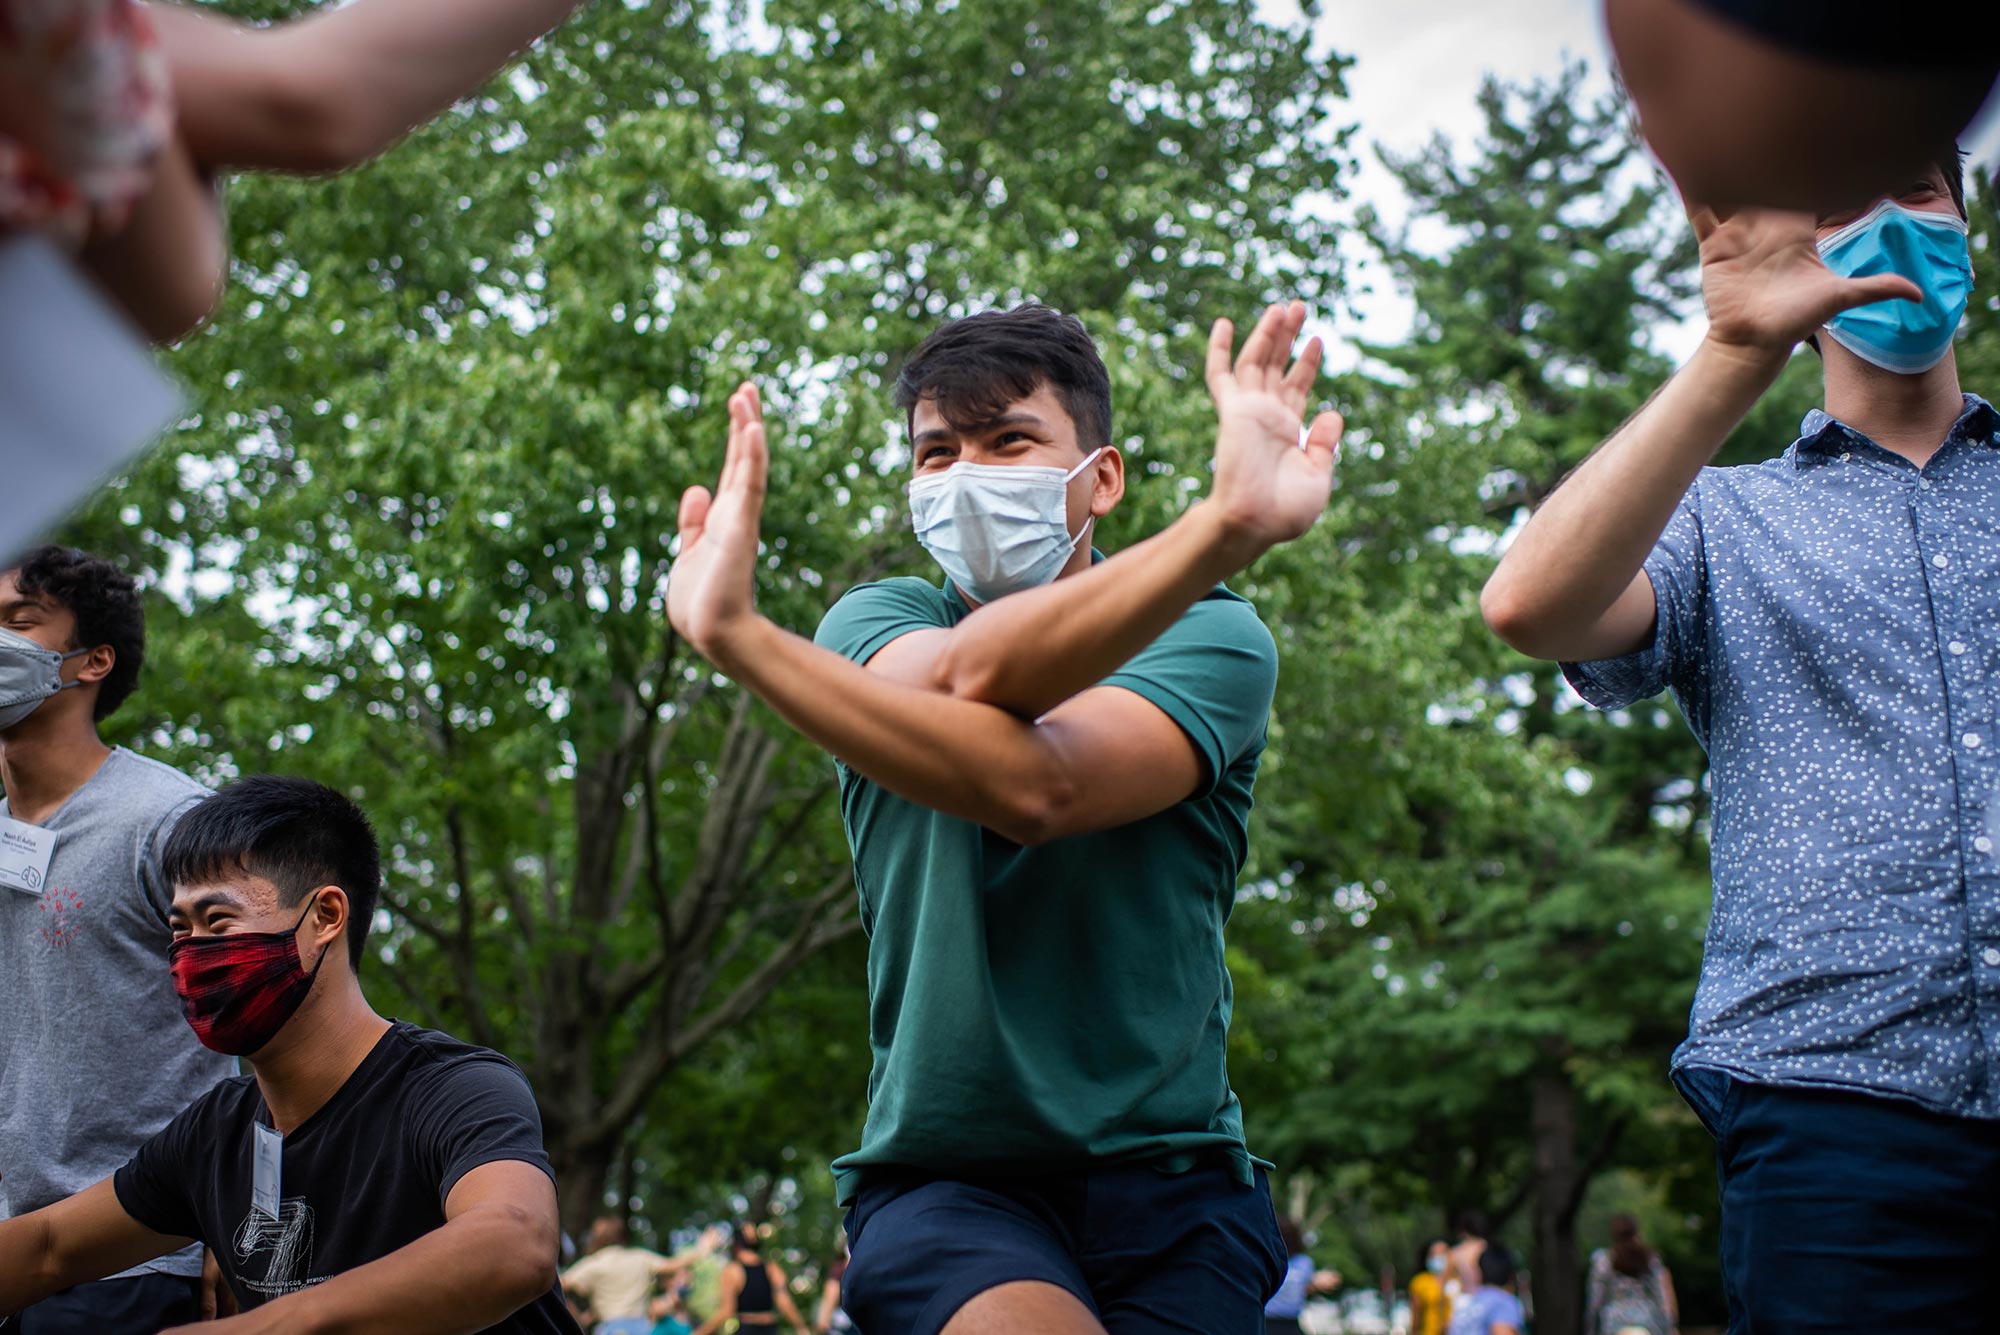 Photo of Giancarlo Sirio (CAS’22), who wears a hunter green shirt and a paper face mask, with his arms crossed, enjoying himself as he participates in a team-building exercise during a FYSOP staff leader training workshop on the BU Beach. Other participants are seen around him.